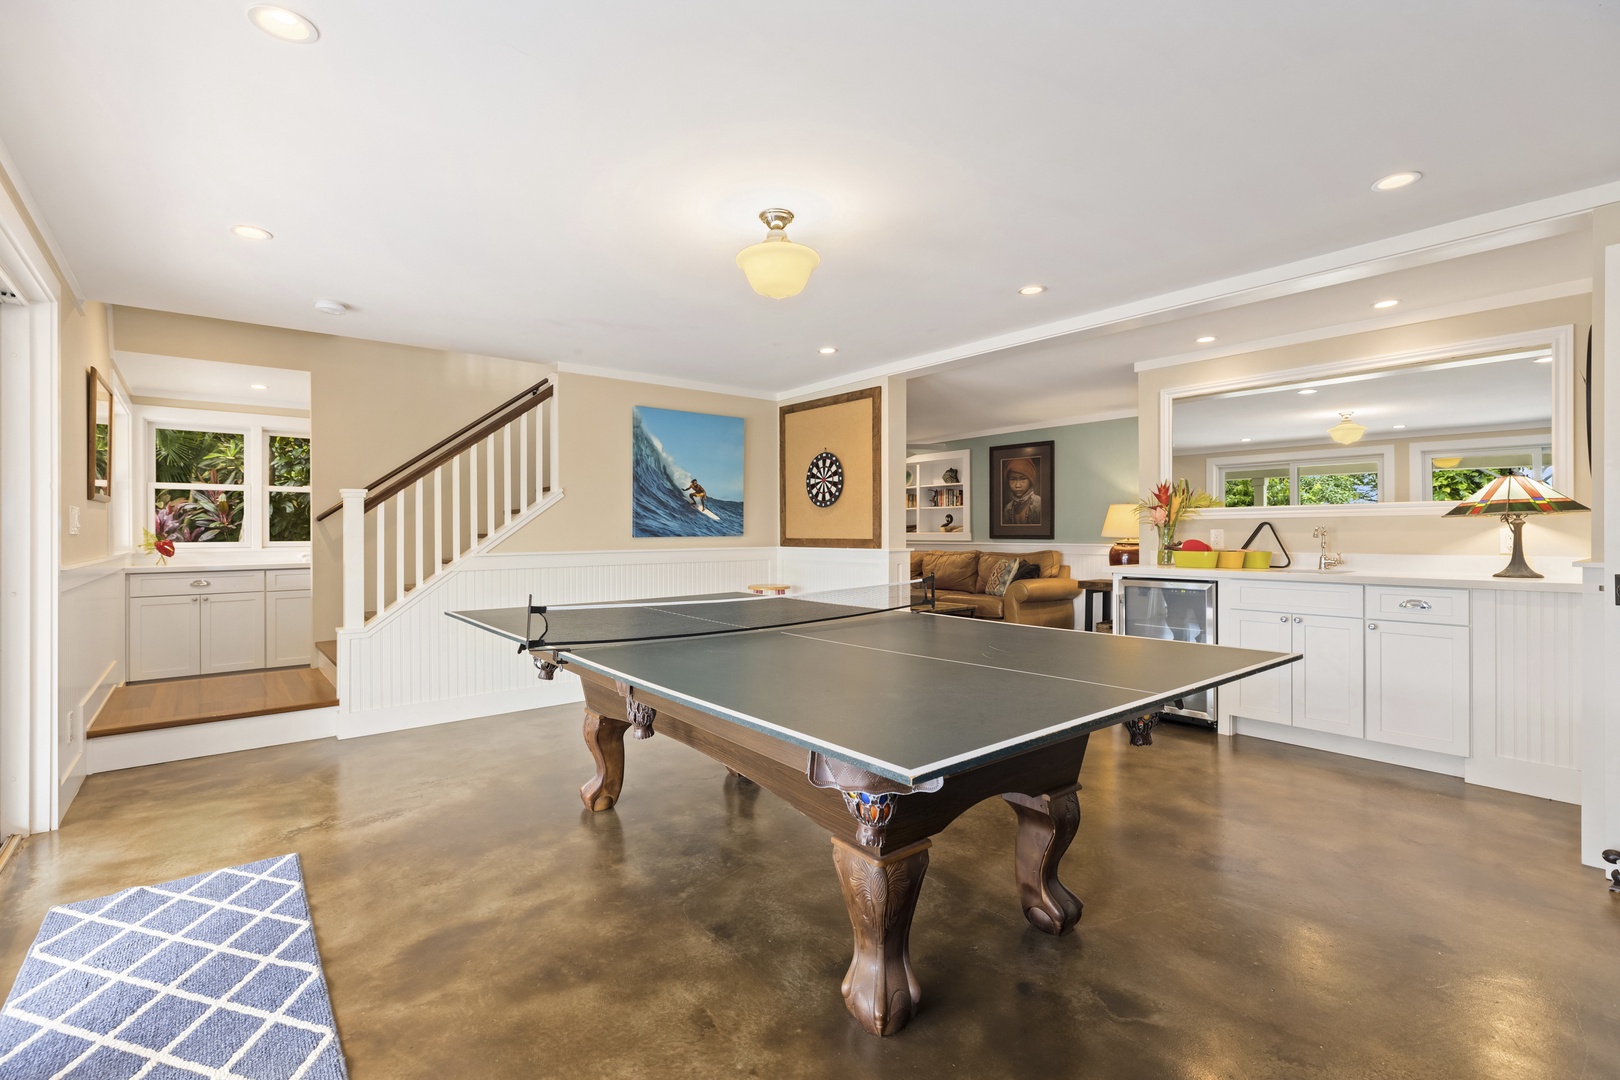 Honolulu Vacation Rentals, Hale Le'ahi - Challenge guests to a game of pool or ping pong